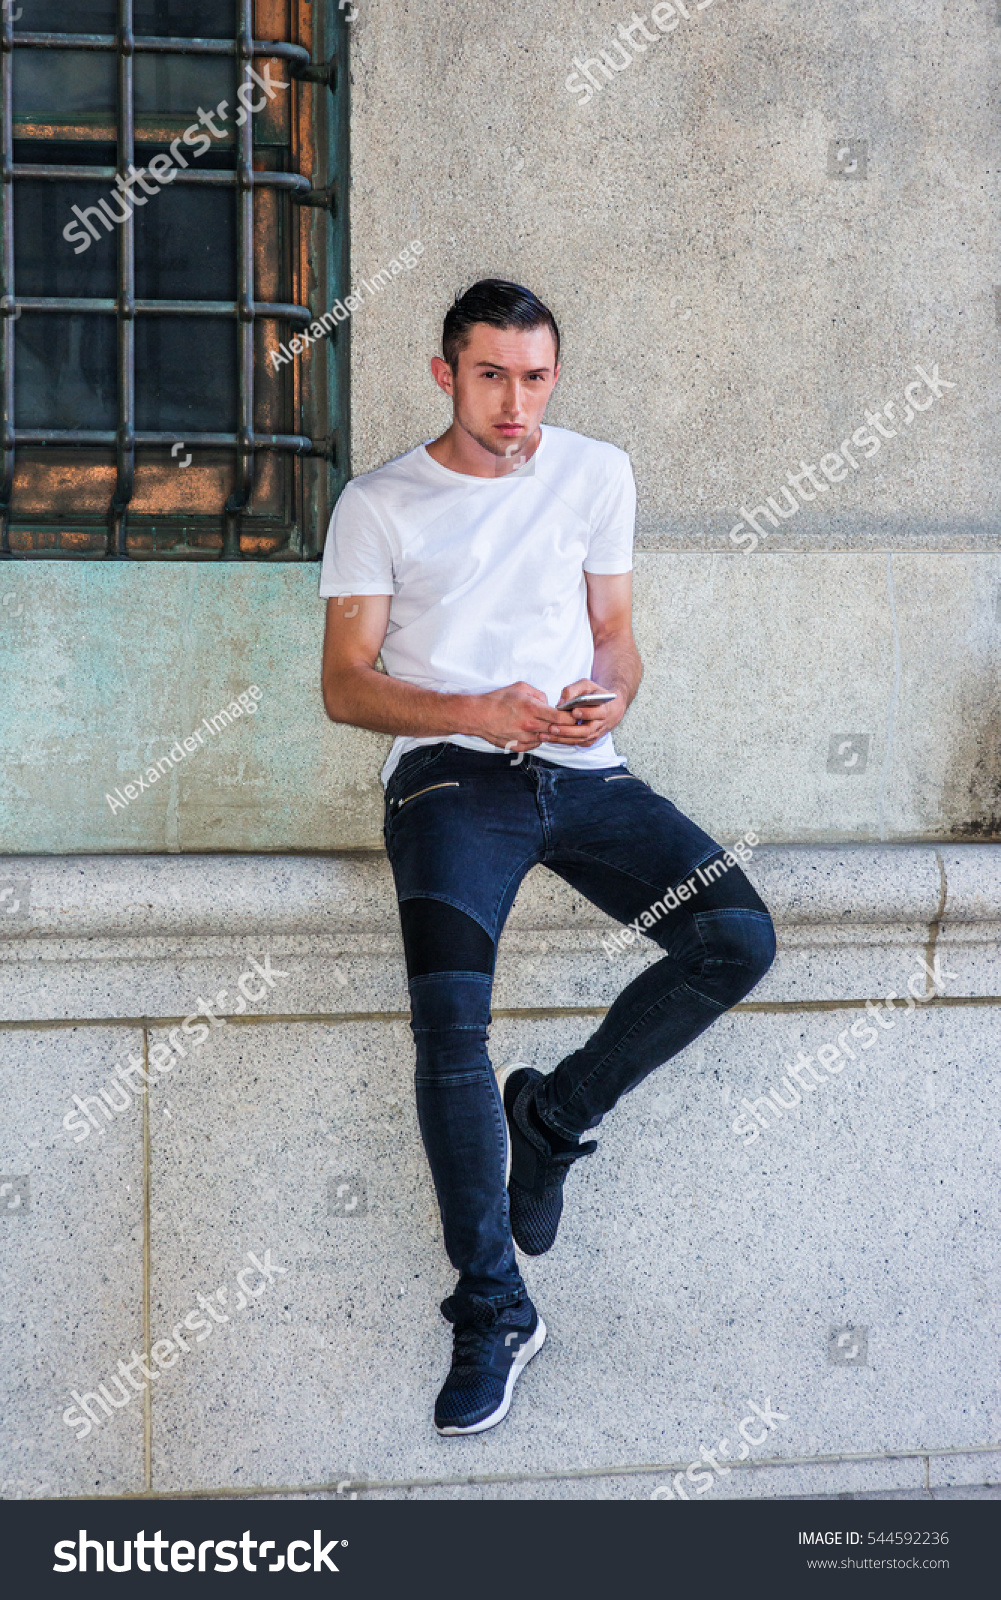 white shirt jeans and sneakers